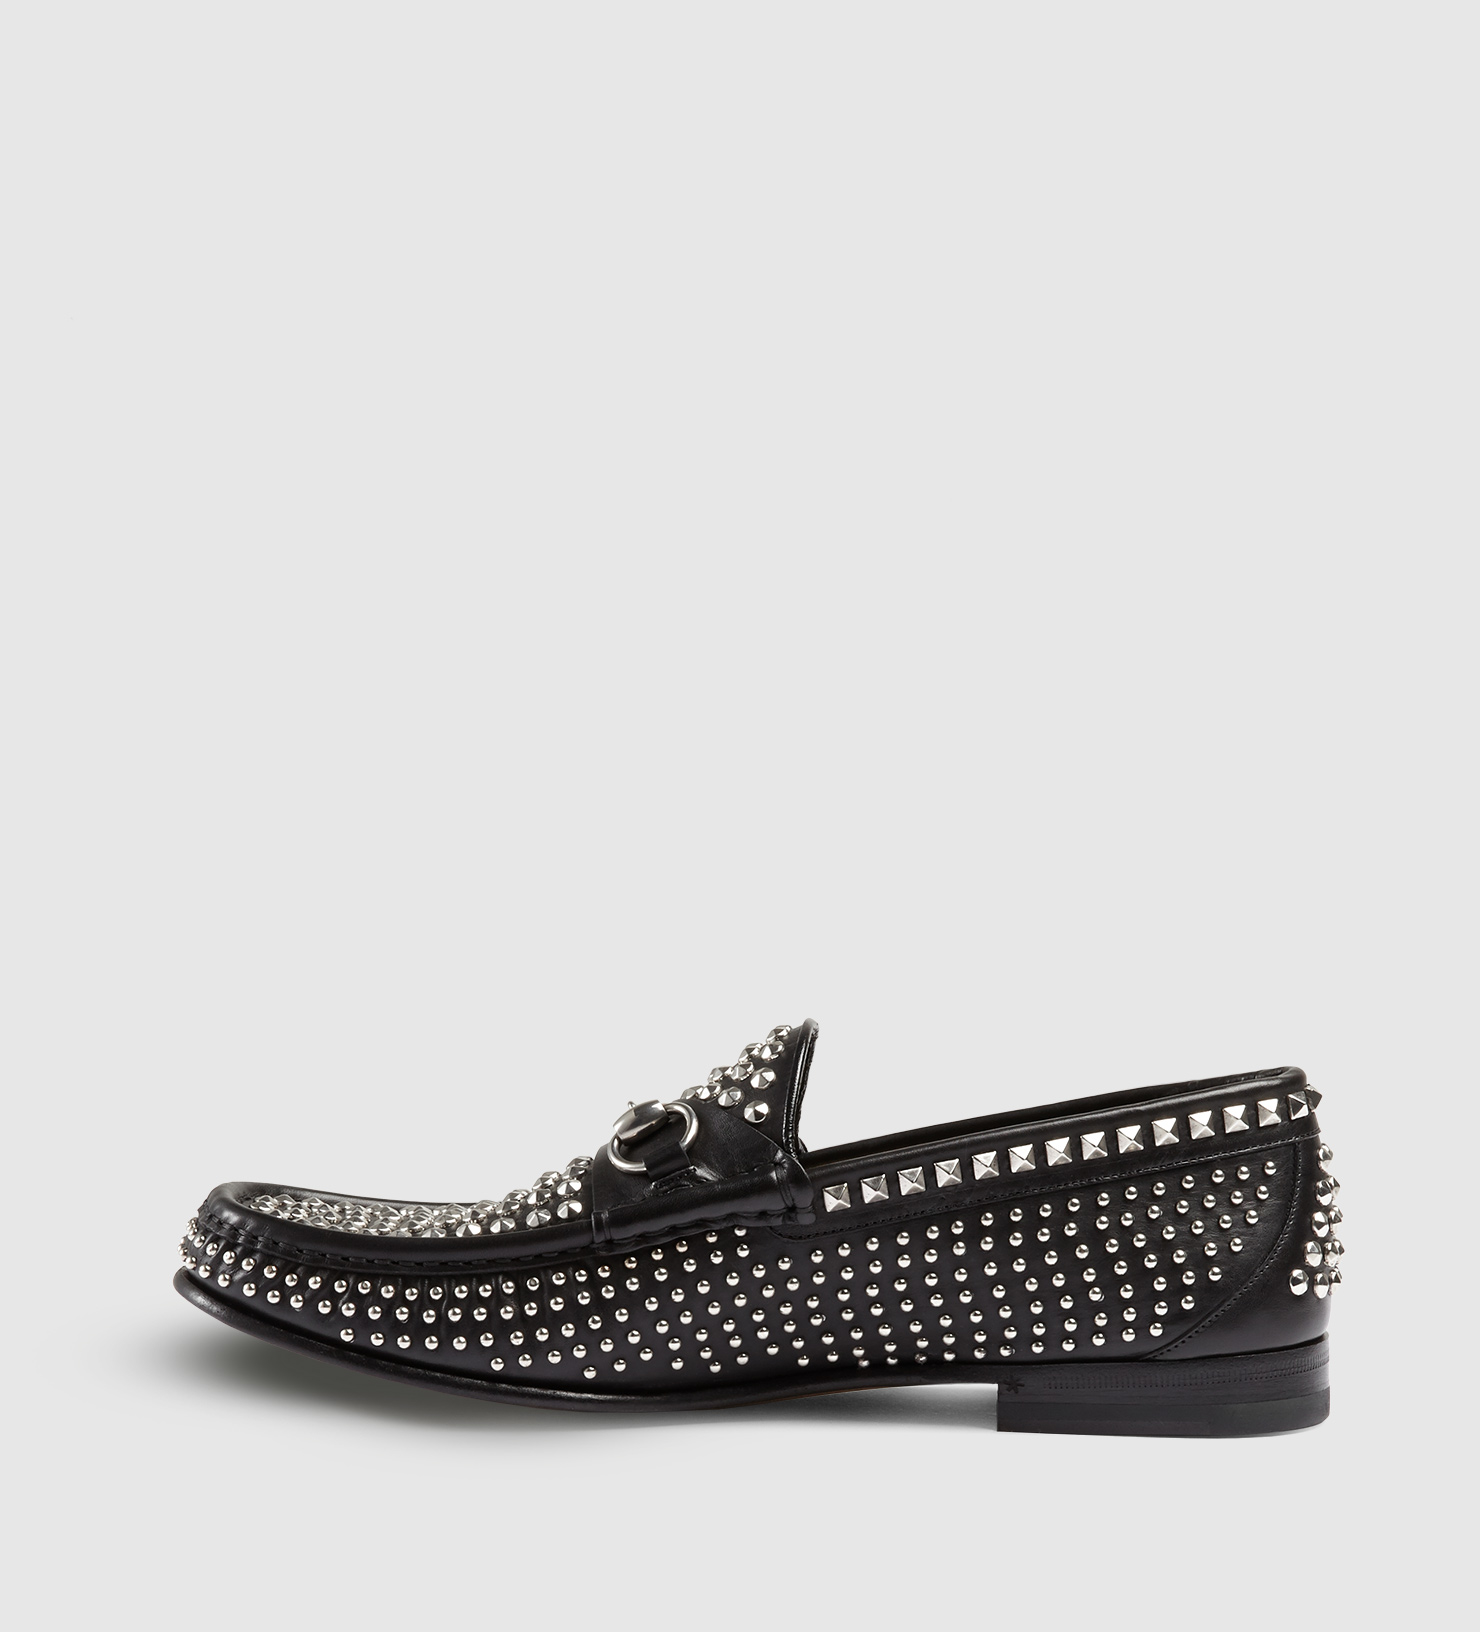 Gucci Studded Leather Horsebit Loafer 